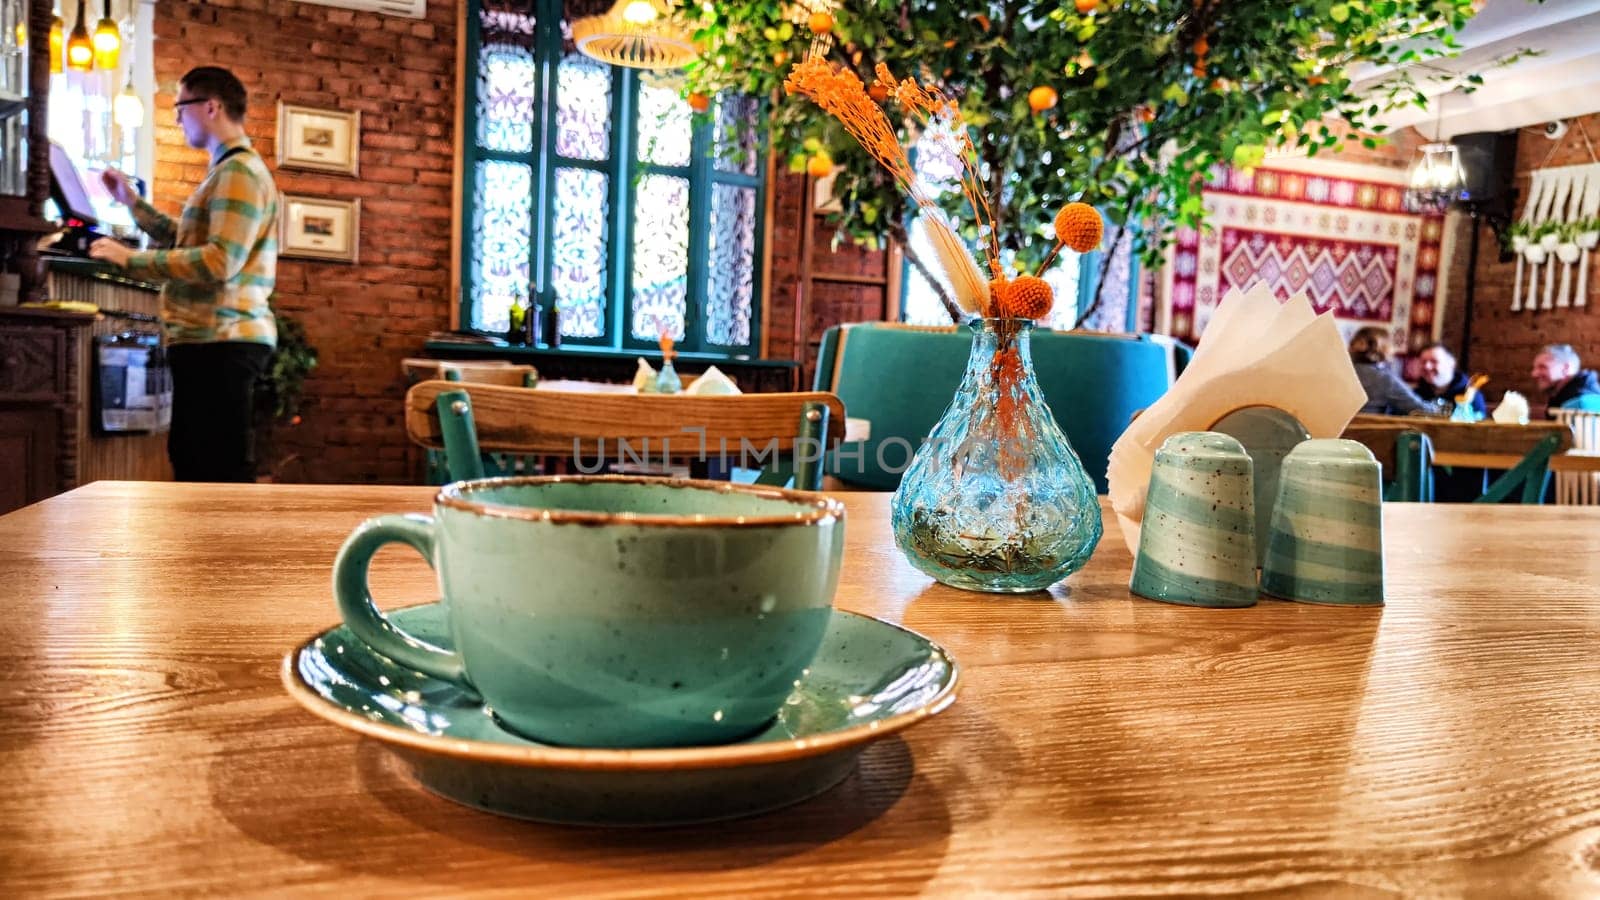 A ceramic teacup rests on a table with cafe interior in soft focus behind